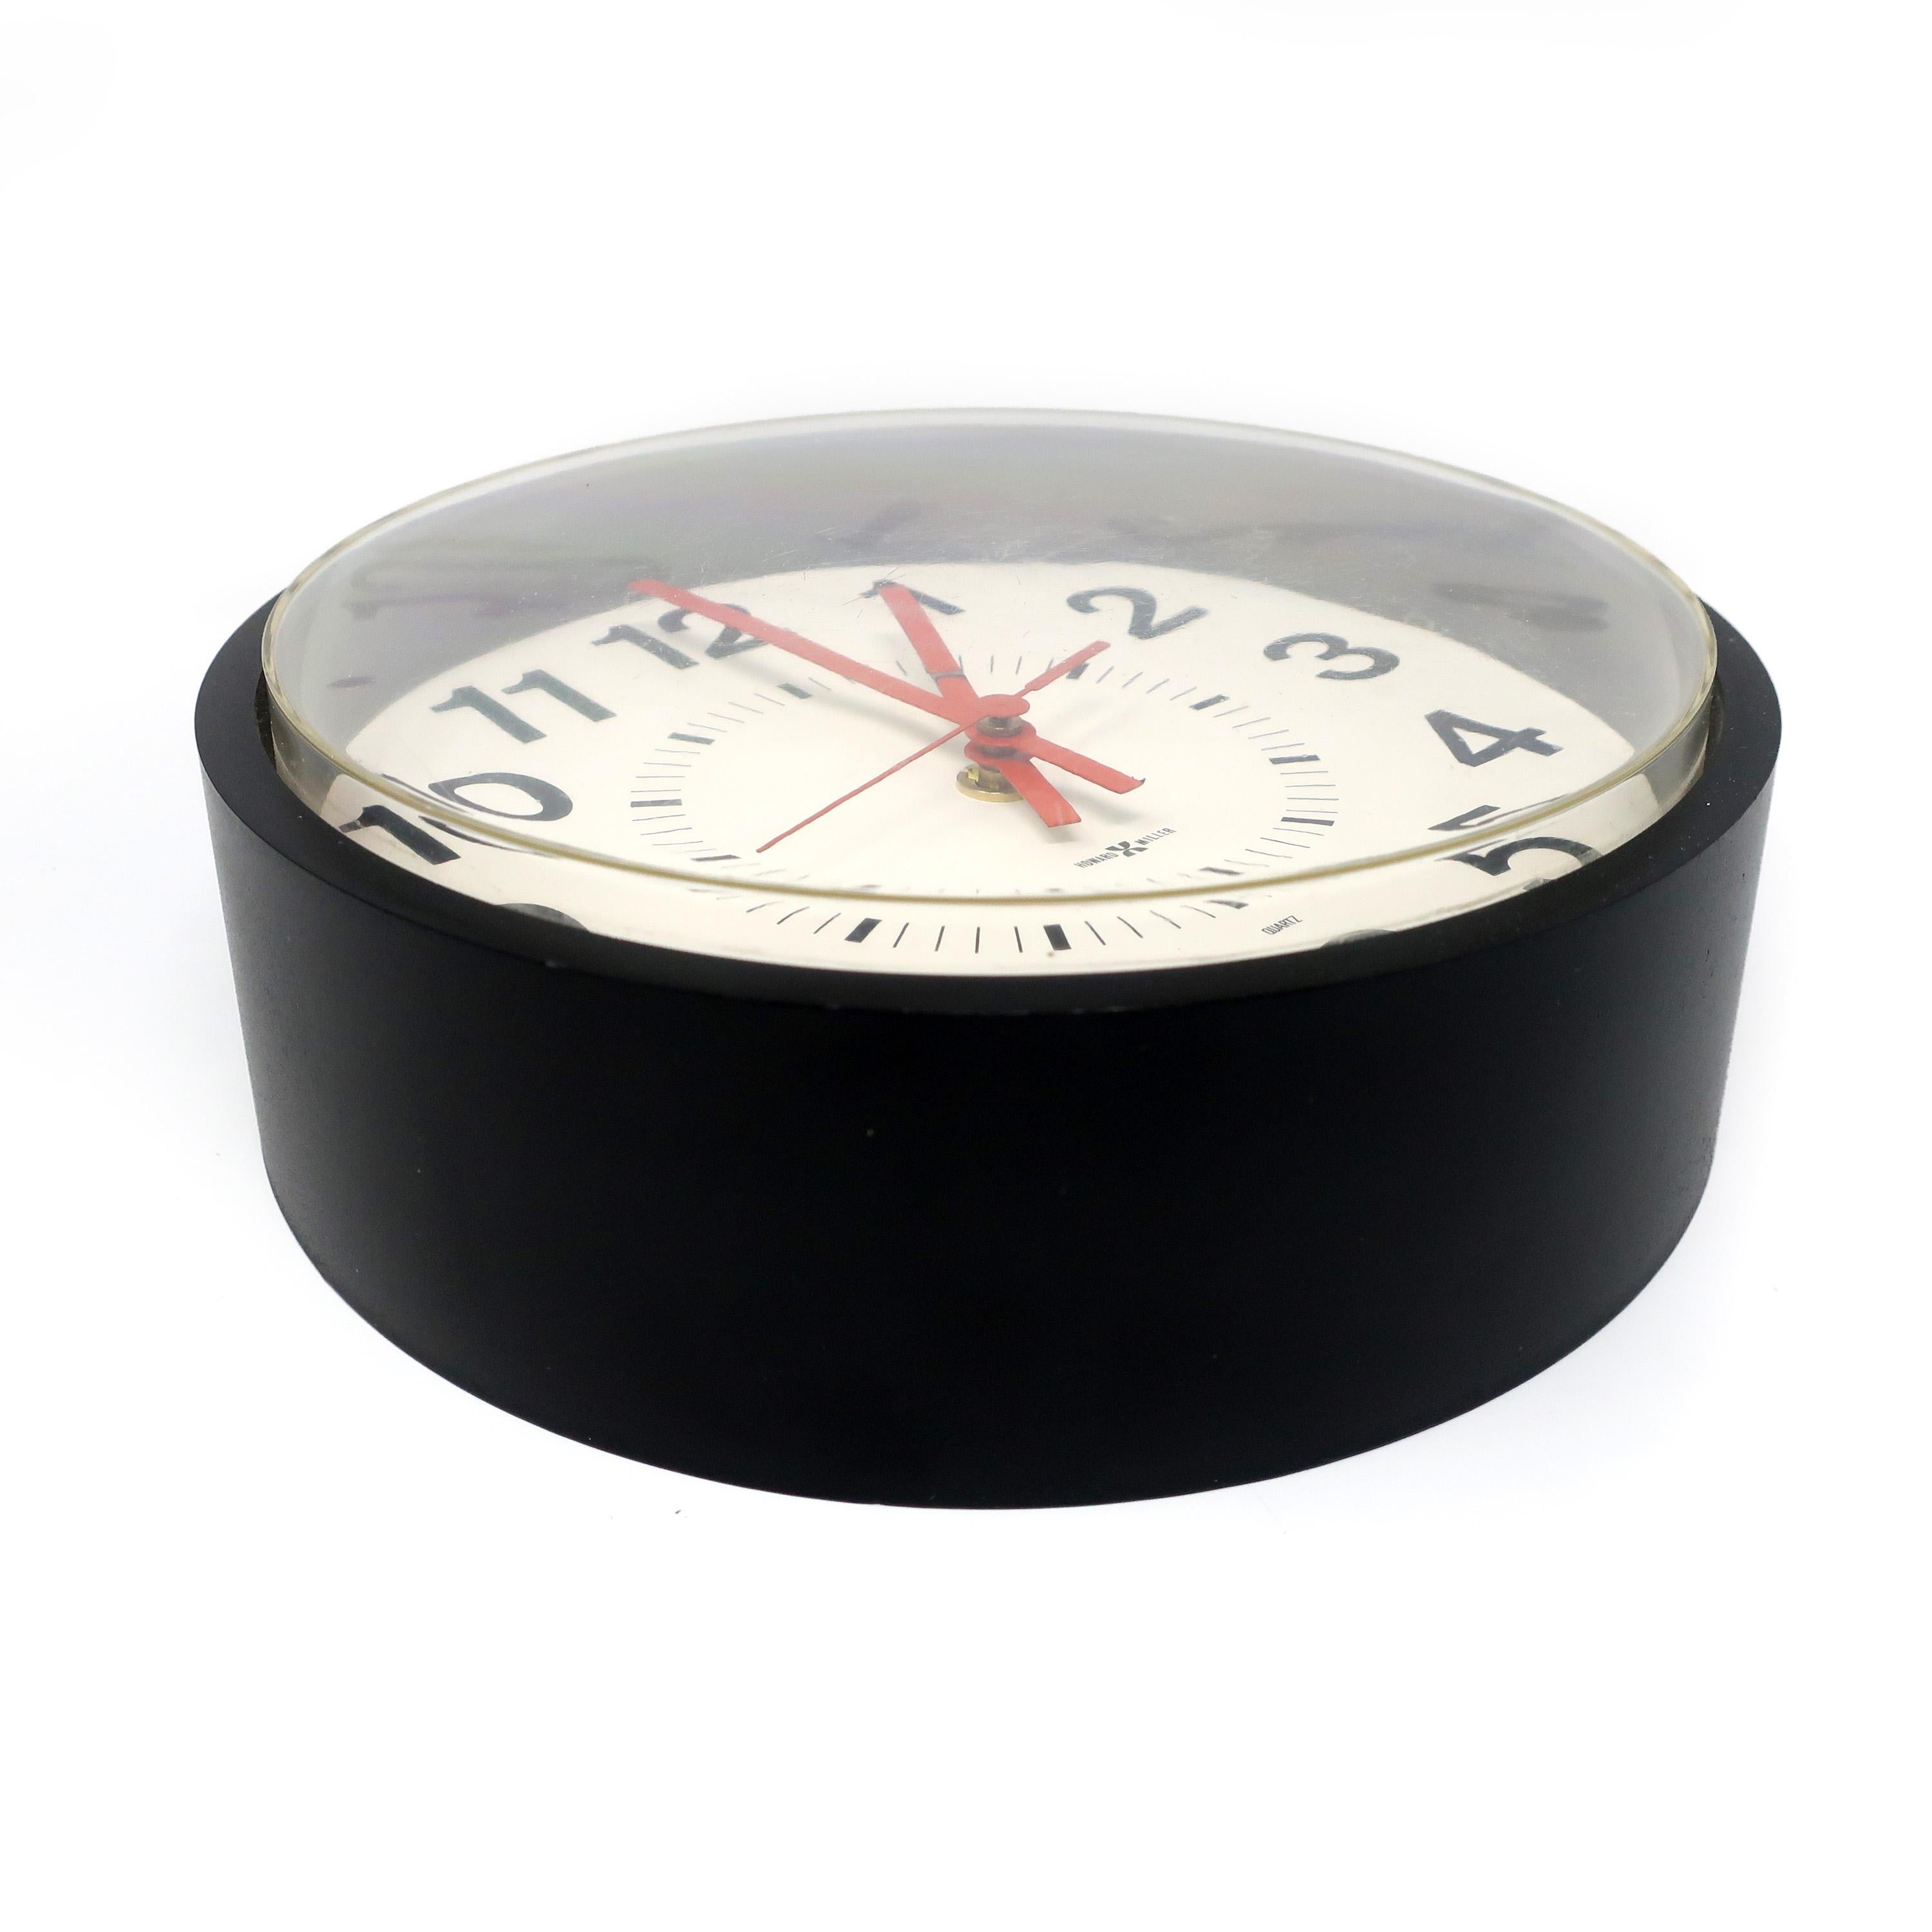 A vintage Howard Miller wall clock with a black plastic body, white face, and black hand and numbers. This clock has a clean mid-century modern look that looks perfect at home or at your office or business.

In very good vintage condition with